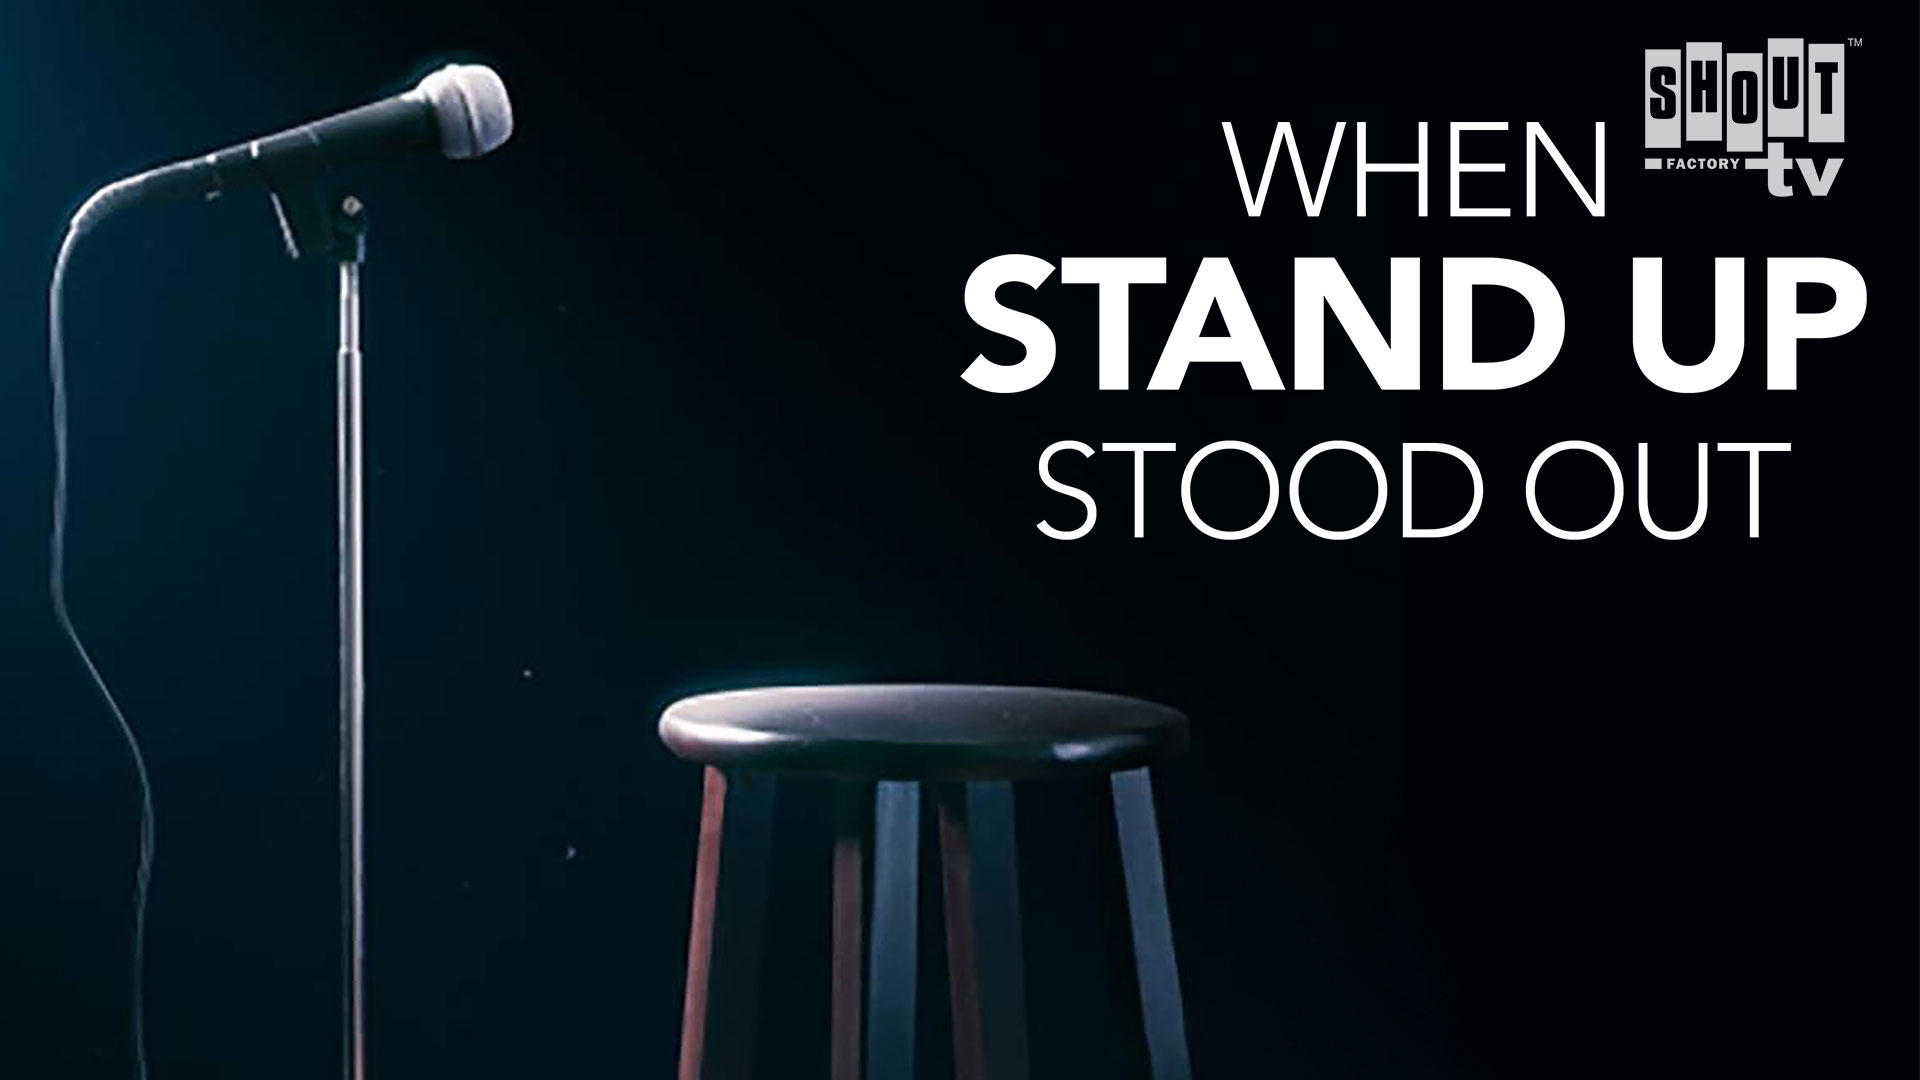 When Stand-Up Stood Out